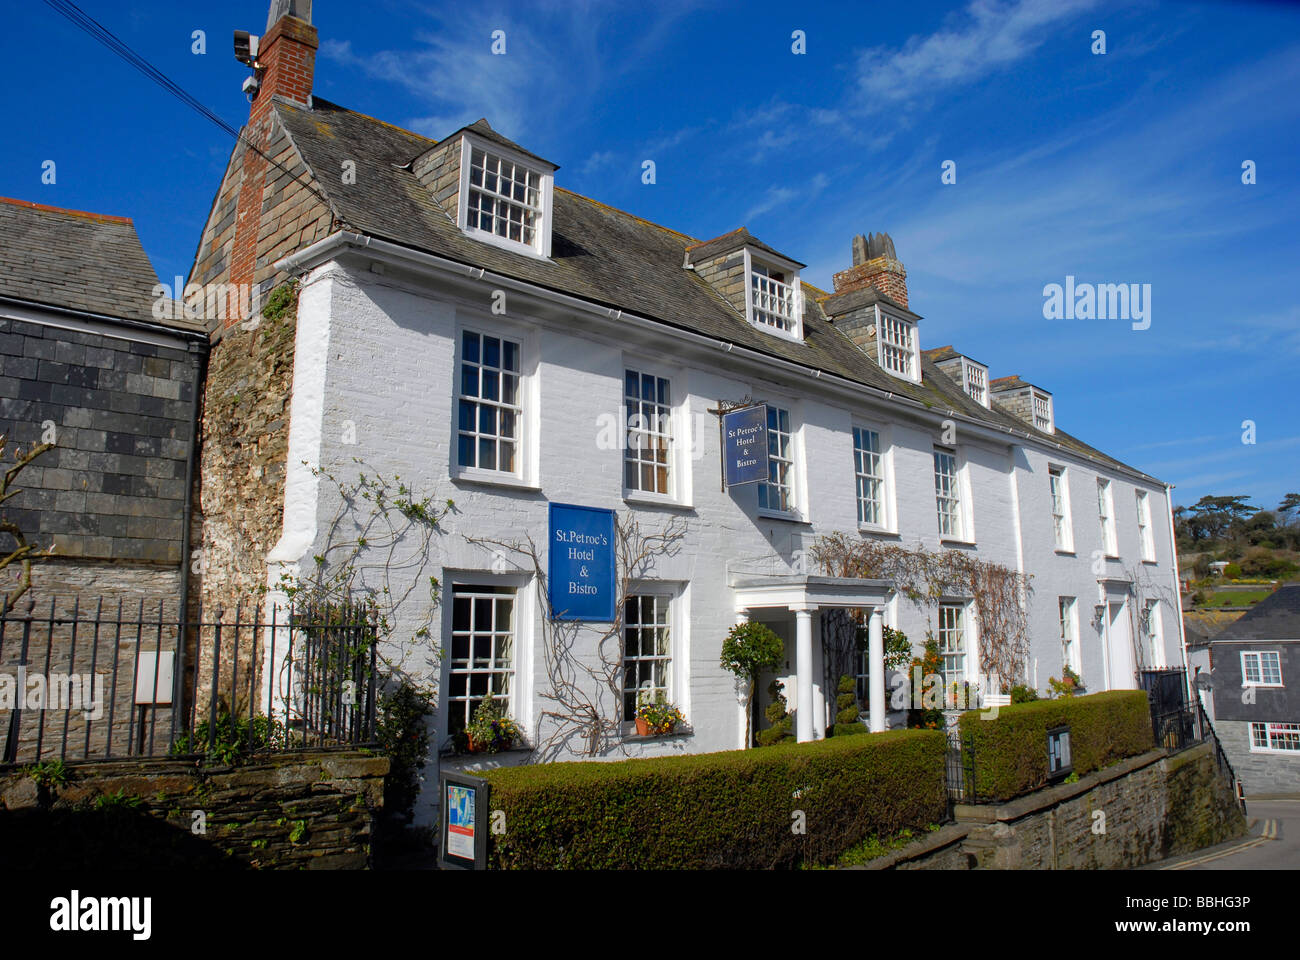 St Petroc's Hotel and Bistro, Padstow, Cornwall, Britain, UK Stock Photo